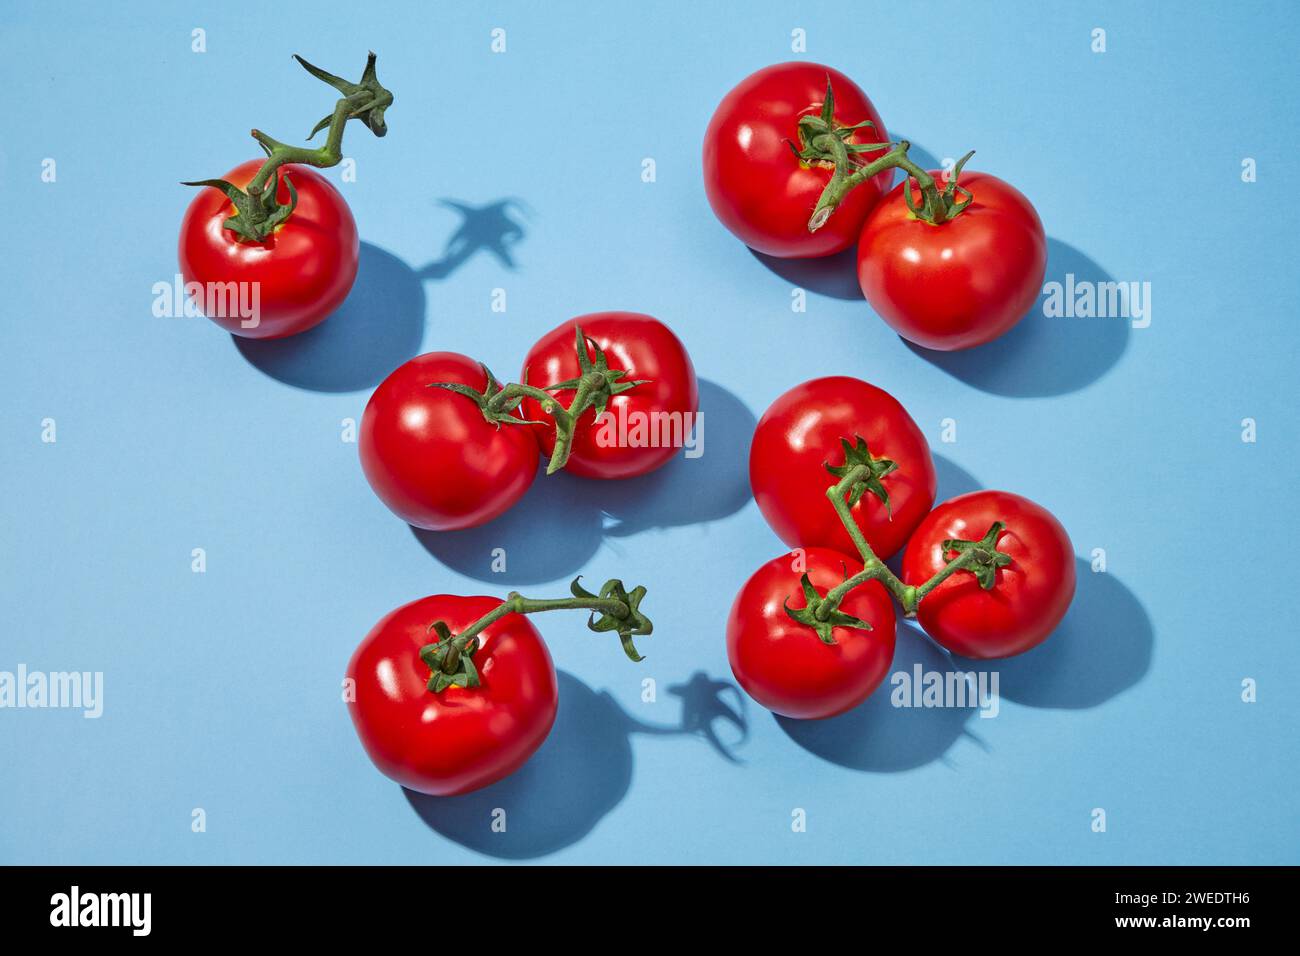 Top view of red ripe fresh tomatoes arranged randomly on a blue background. Minimal scene for advertising product with tomato ingredient. Stock Photo